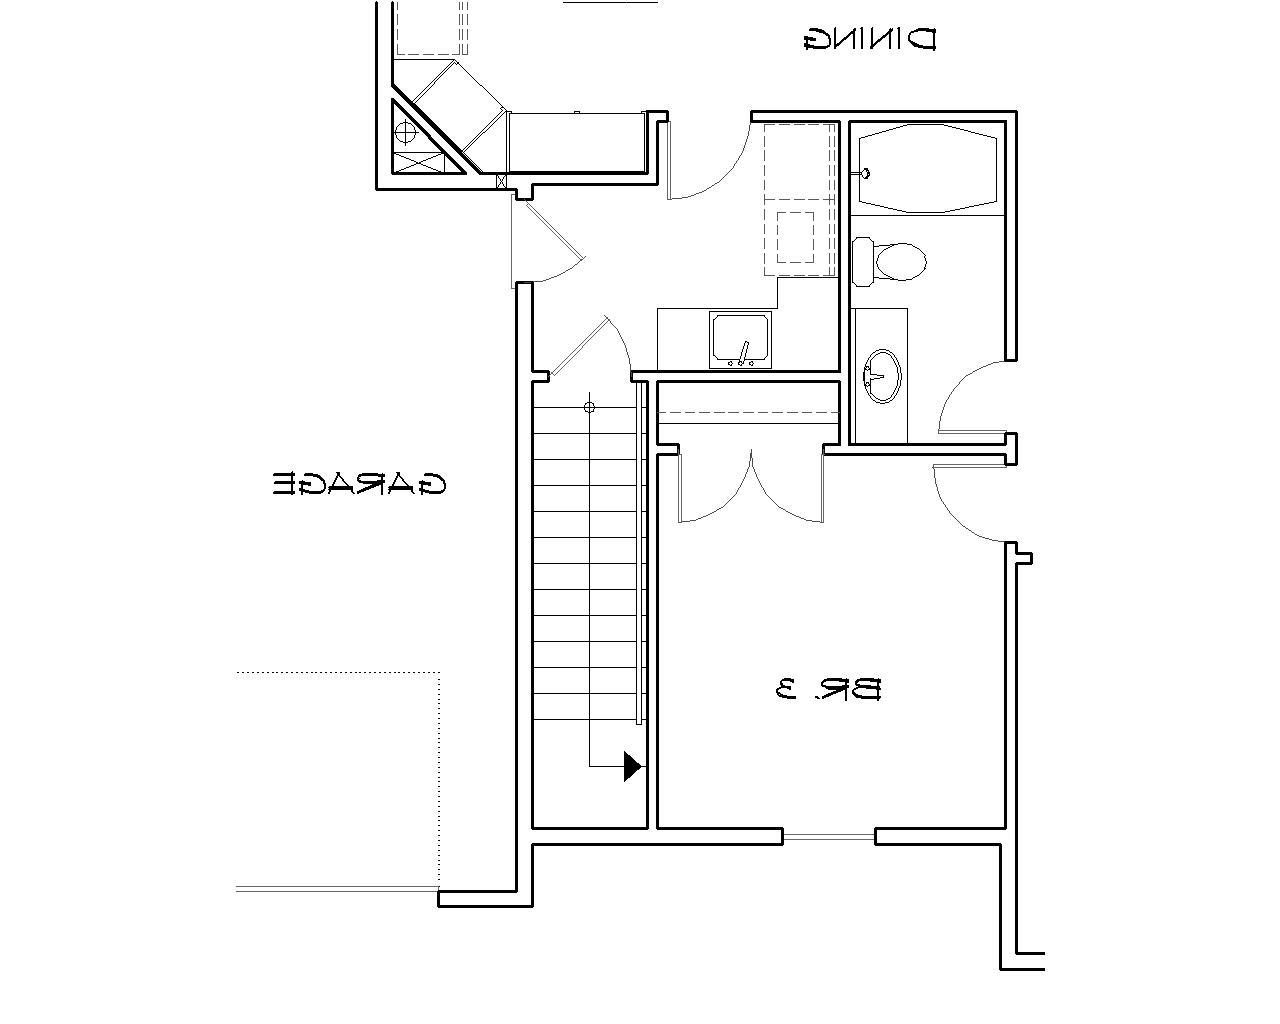 Basement Stair Location image of Stamford House Plan